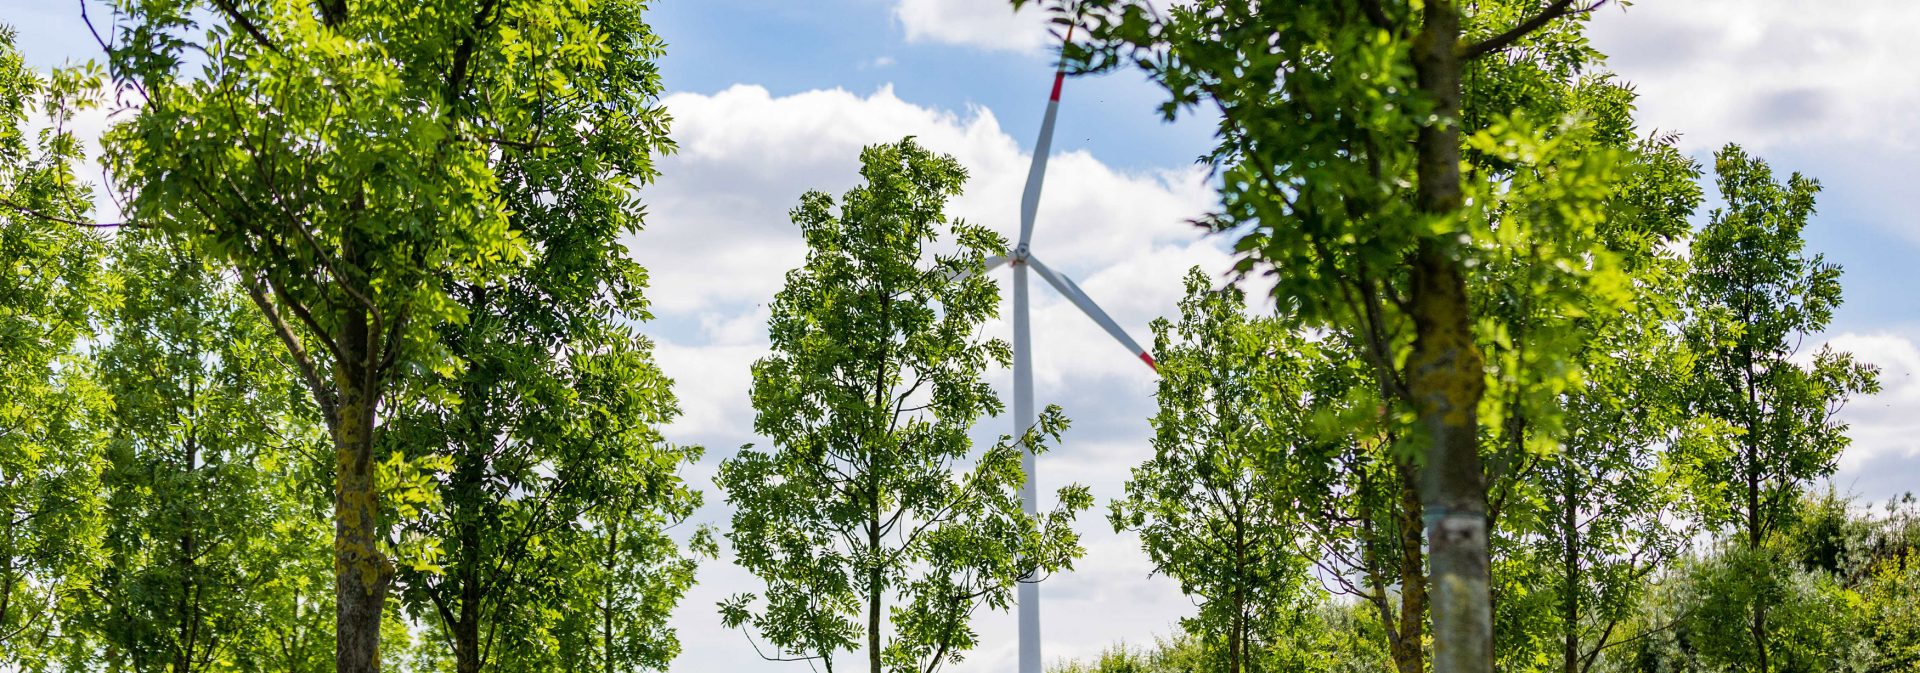 A meadow with trees, a wind turbine in the background